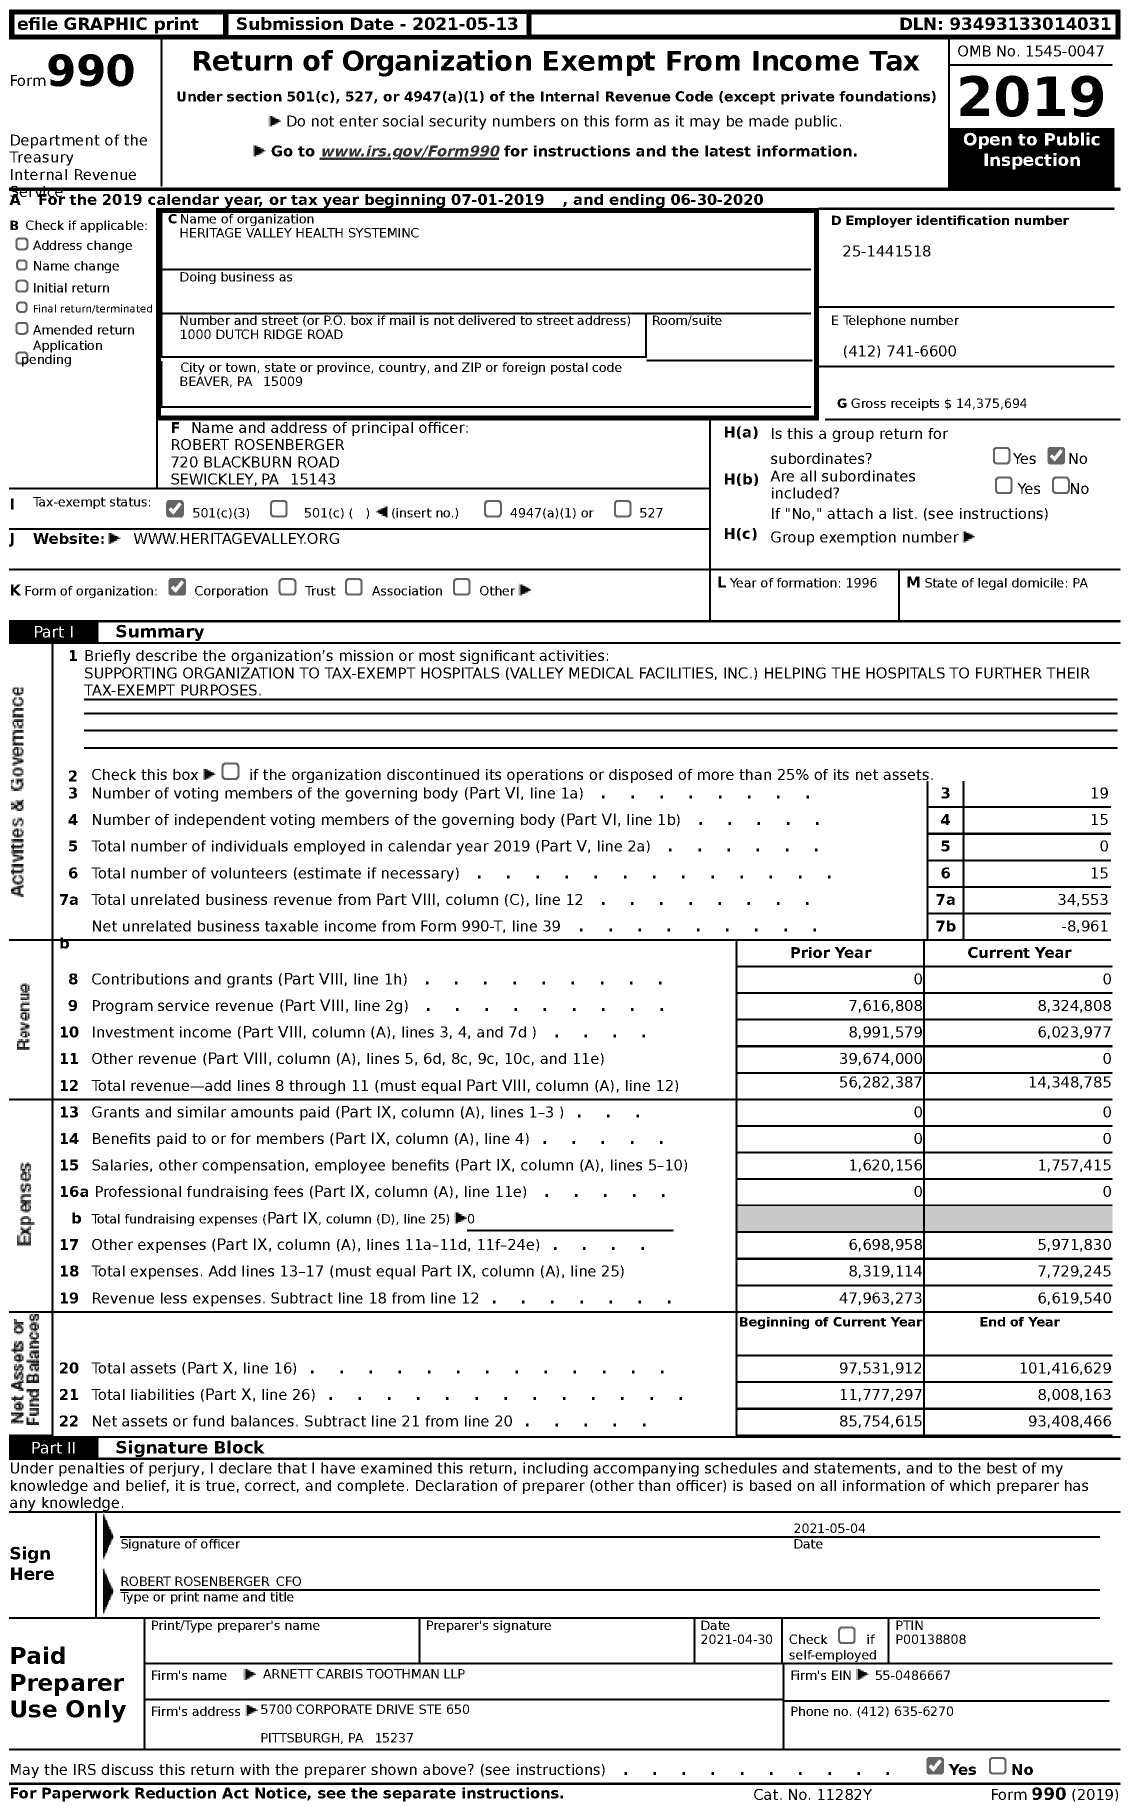 Image of first page of 2019 Form 990 for Heritage Valley Health System